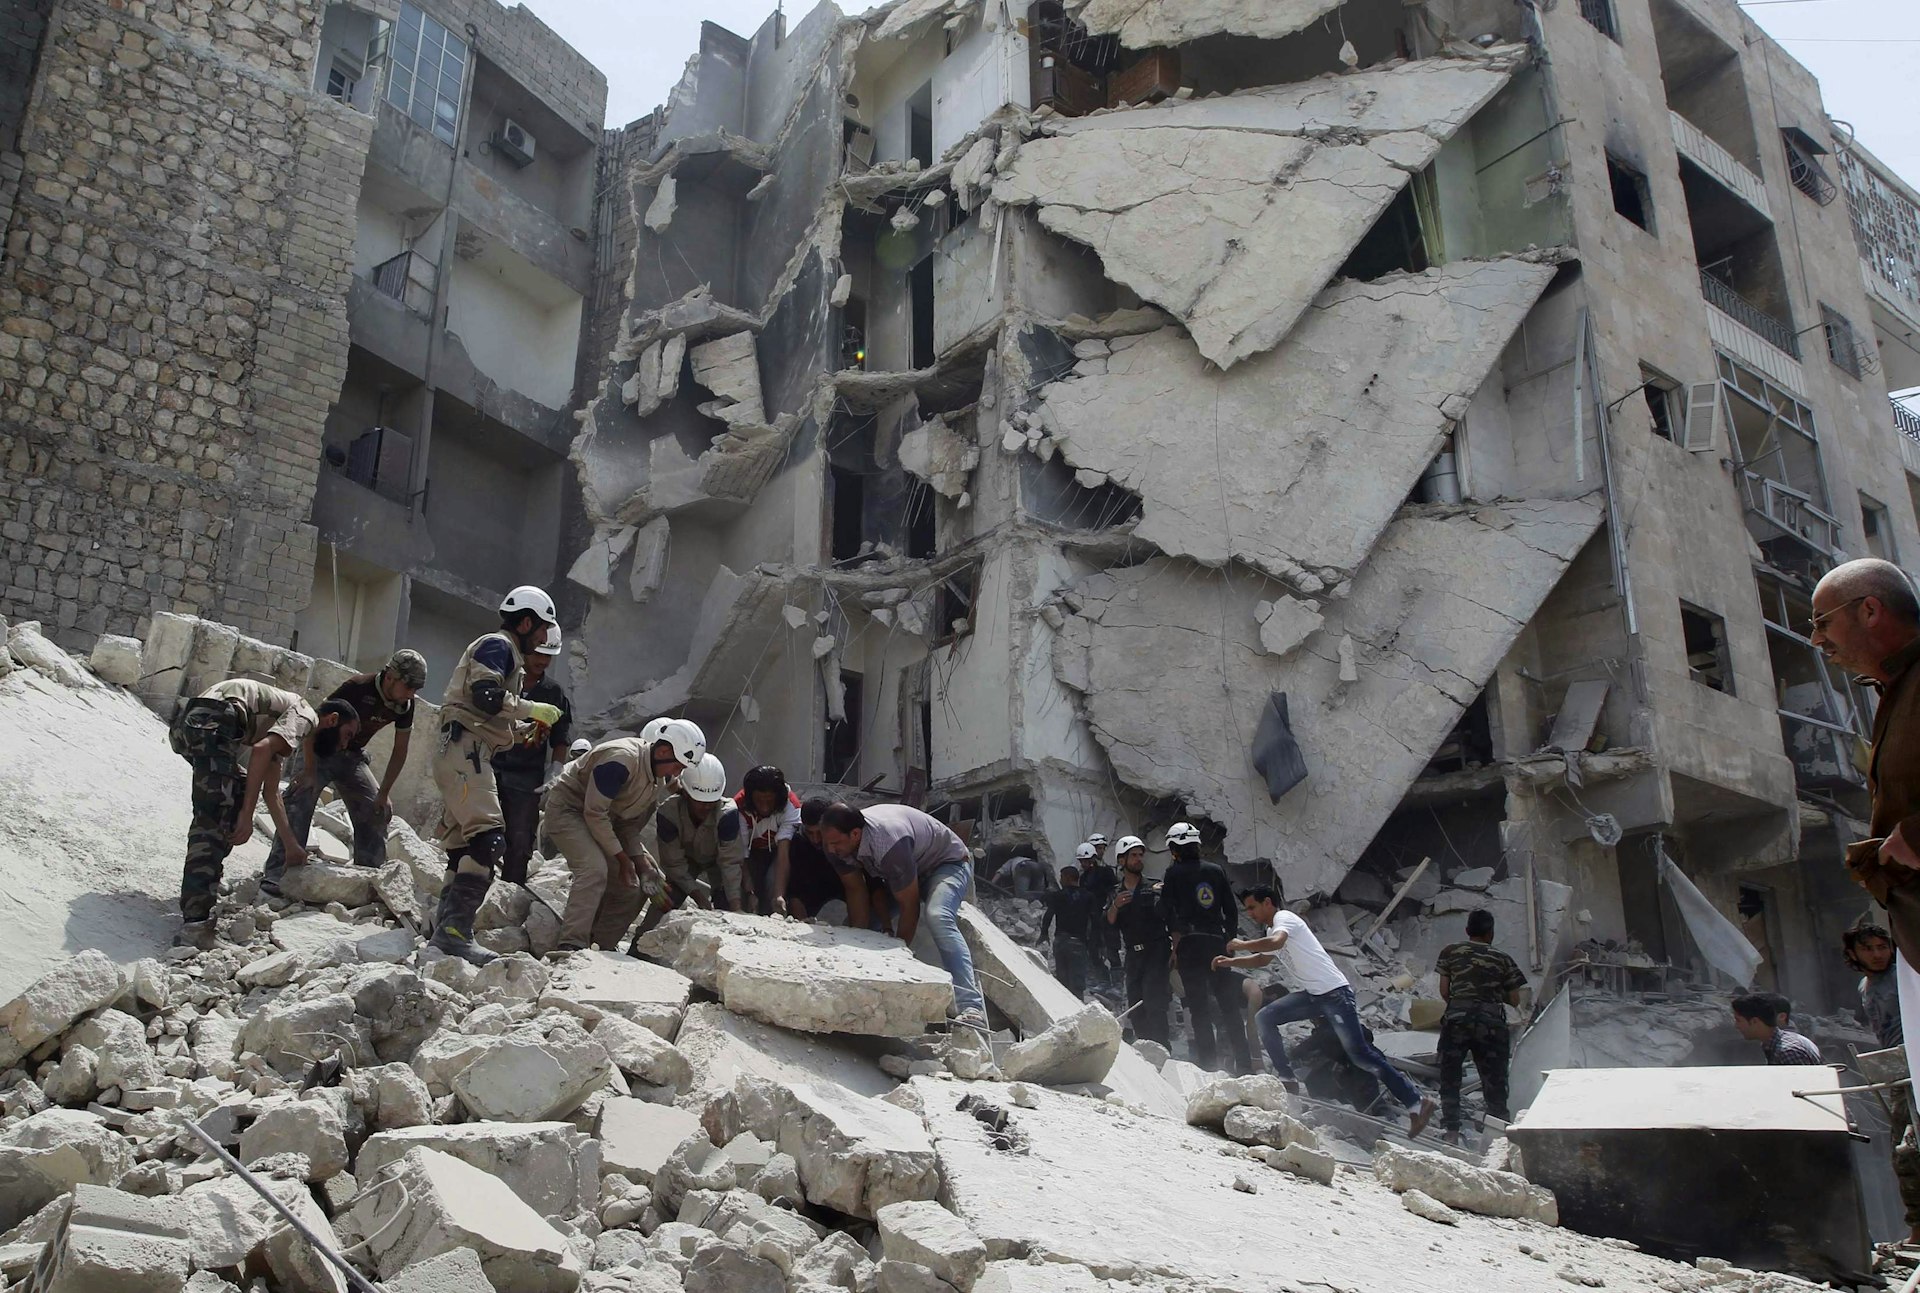 Civil Defence members, rebel fighters and civilians search for survivors at a site hit by what activists said was a barrel bomb in al-Qarlaq neighbourhood of Aleppo